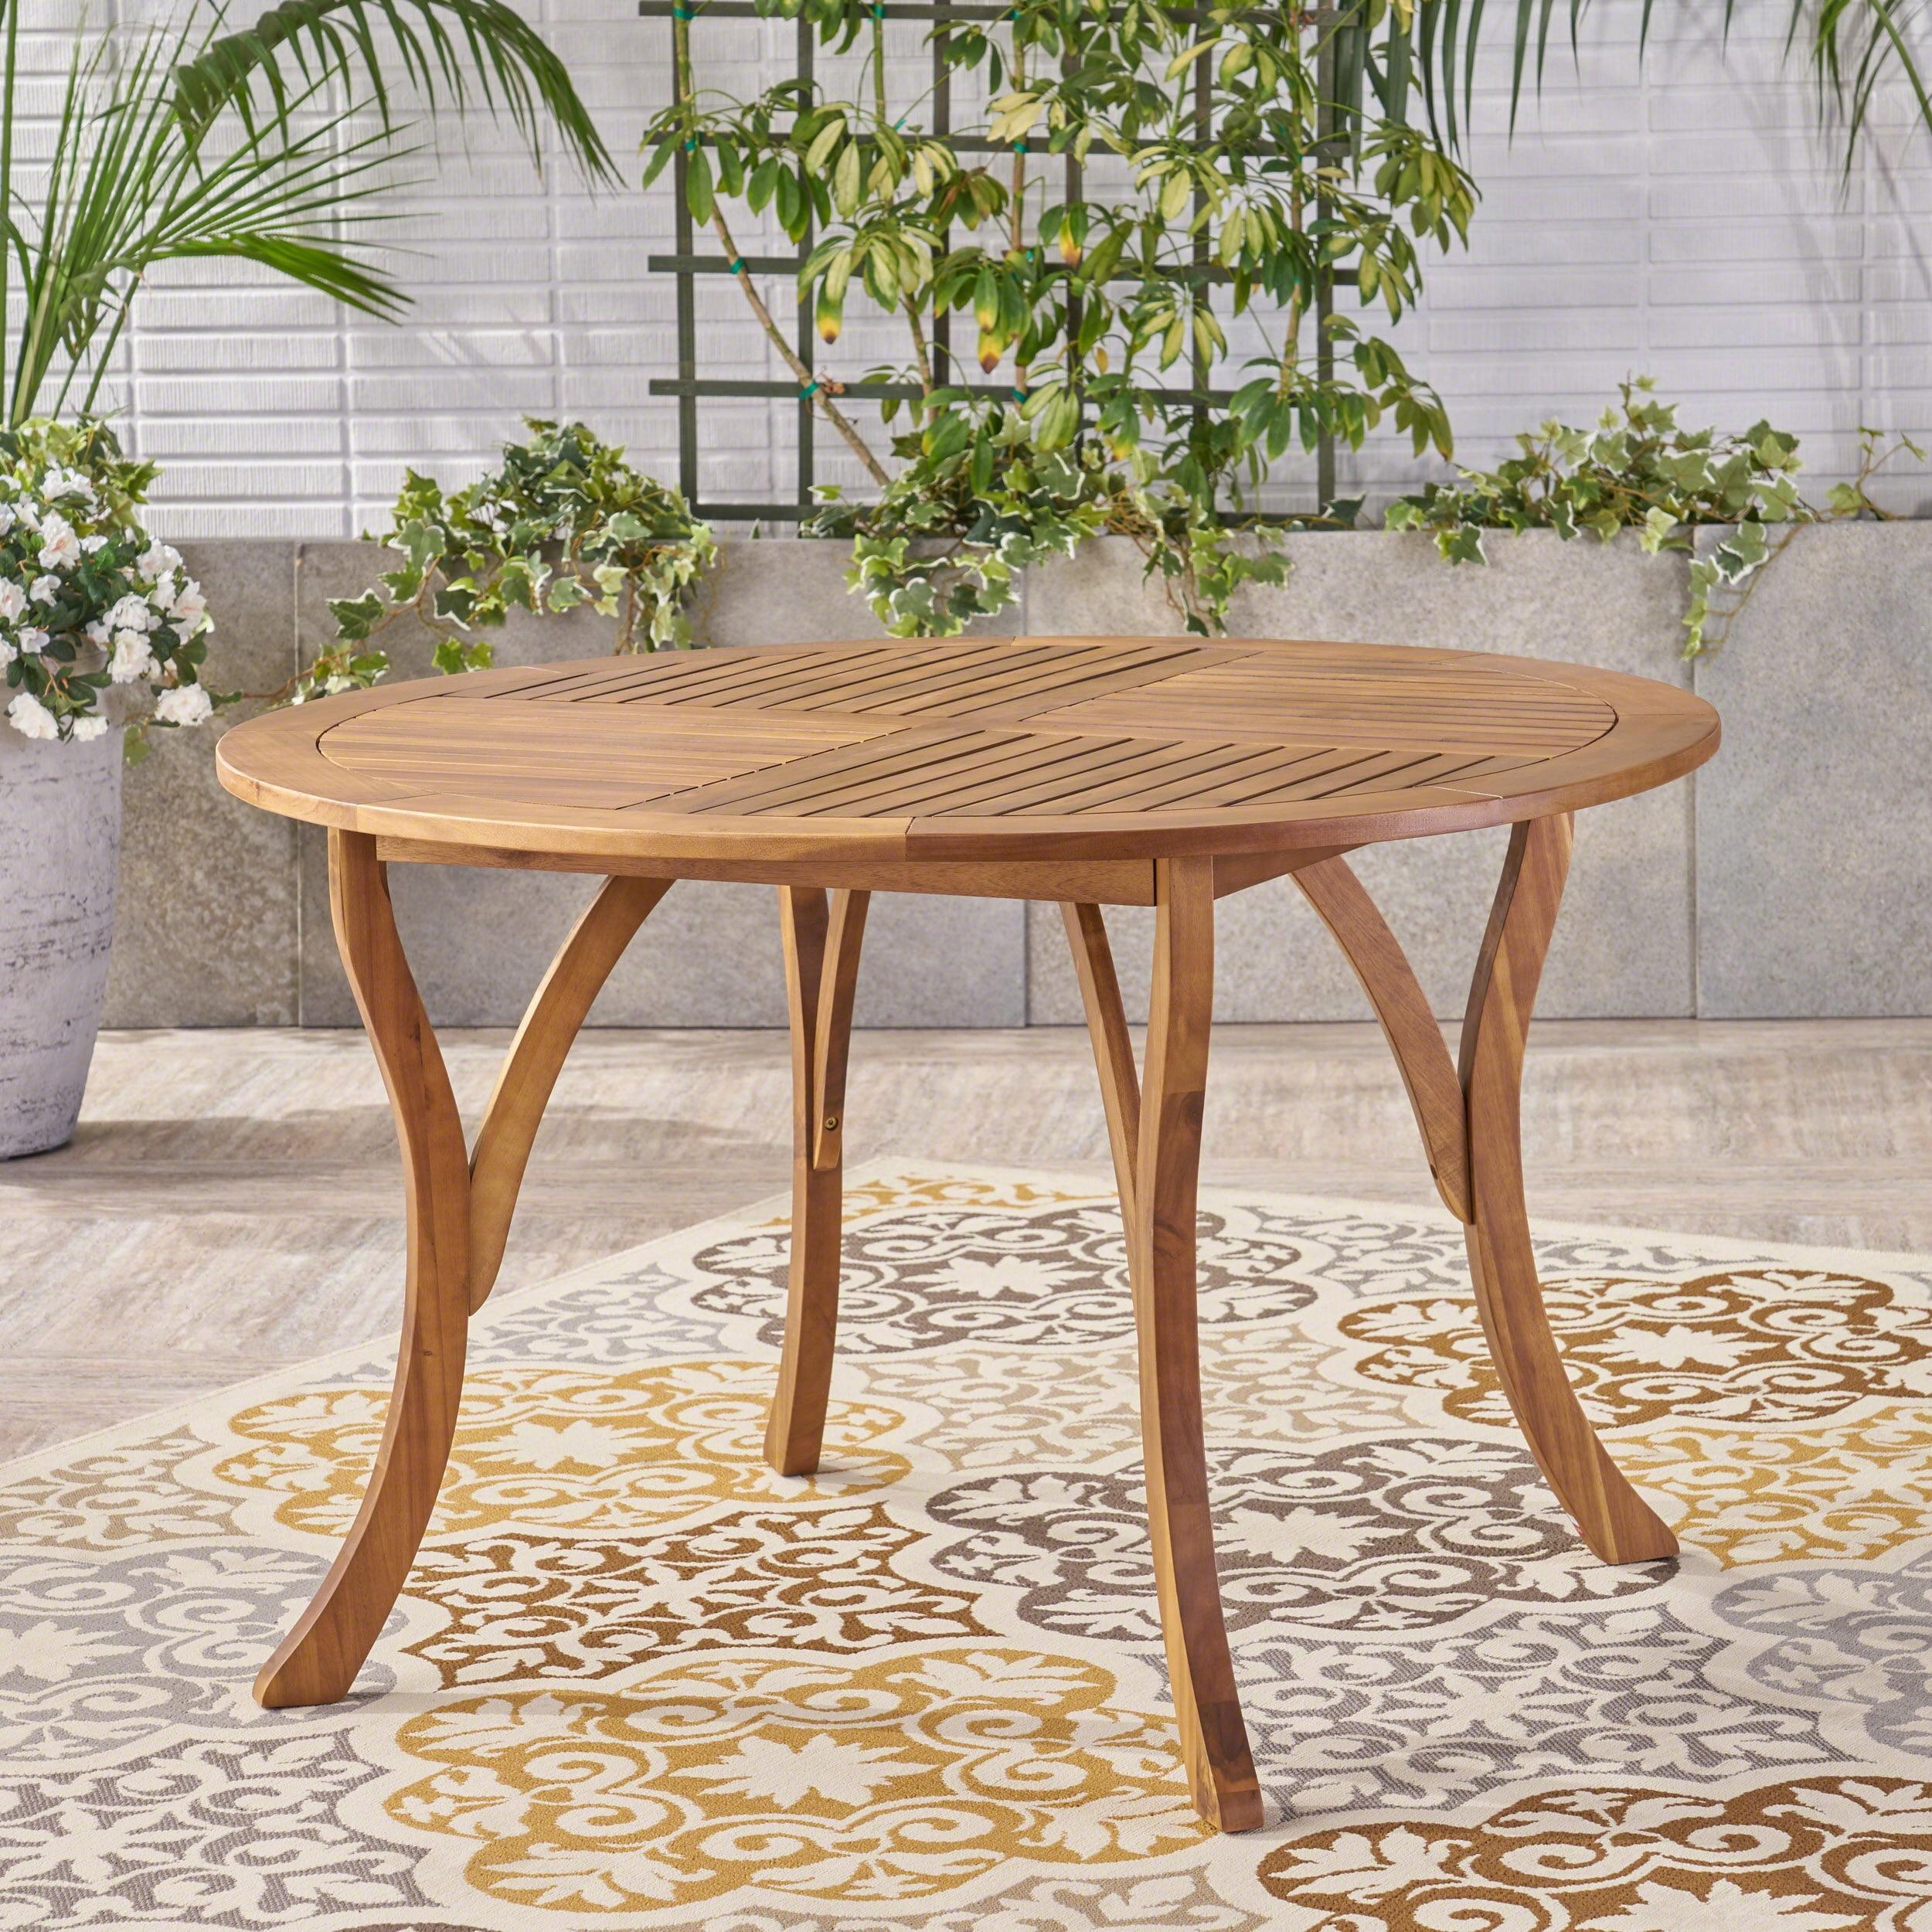 Calm Teak Brown Round Acacia Wood Outdoor Dining Table for 6